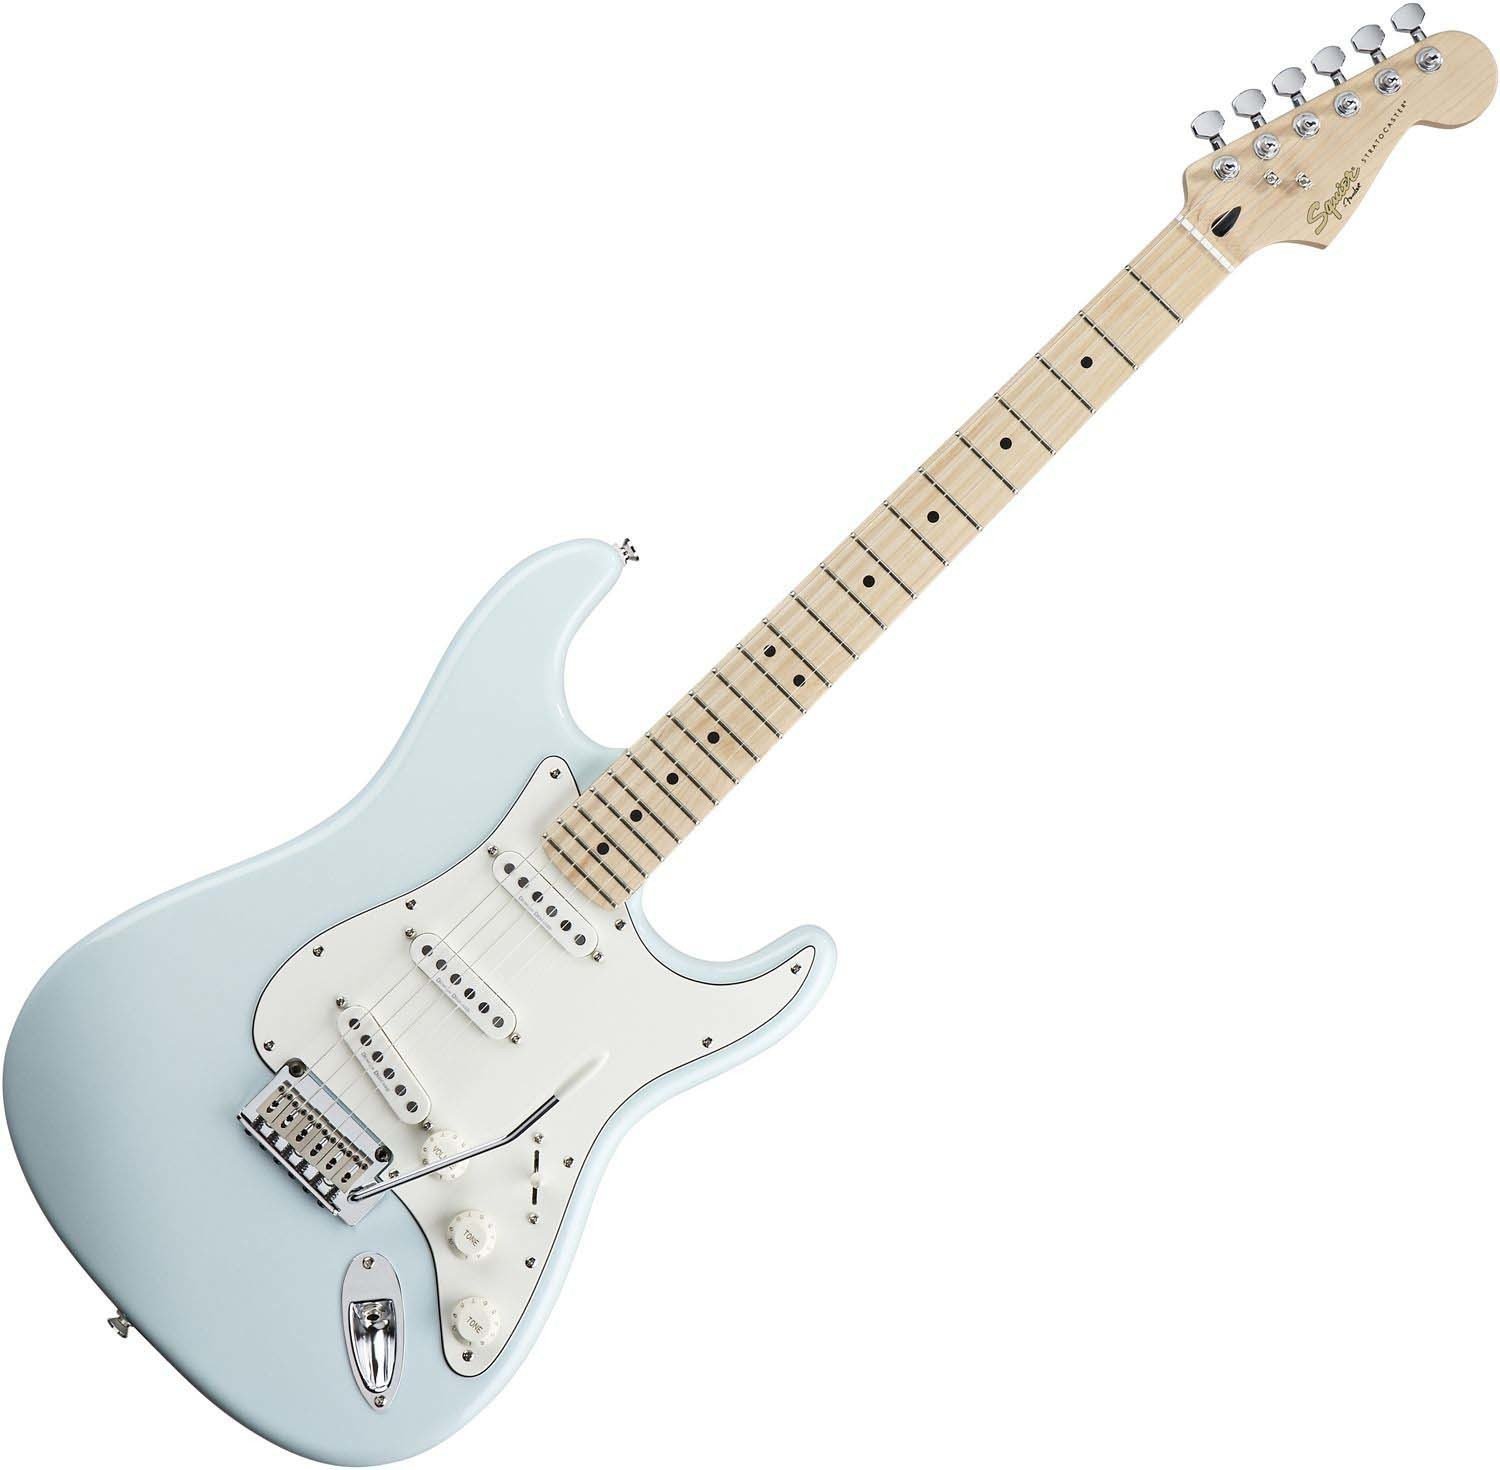 Electric guitar Fender Squier Deluxe Stratocaster MN Daphne Blue